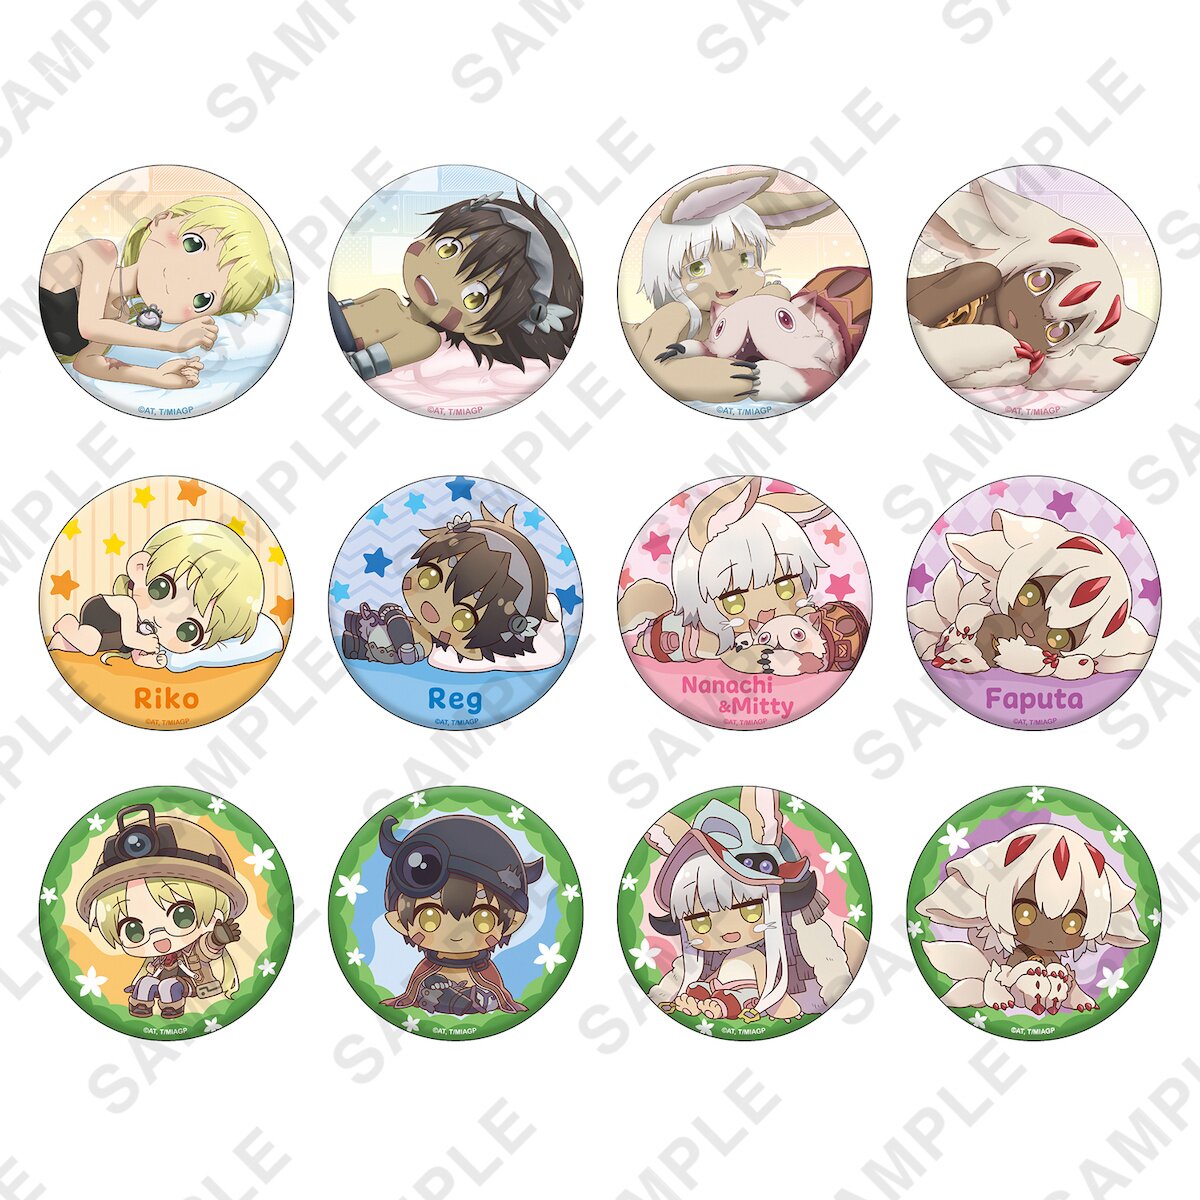 Pin on Made in Abyss